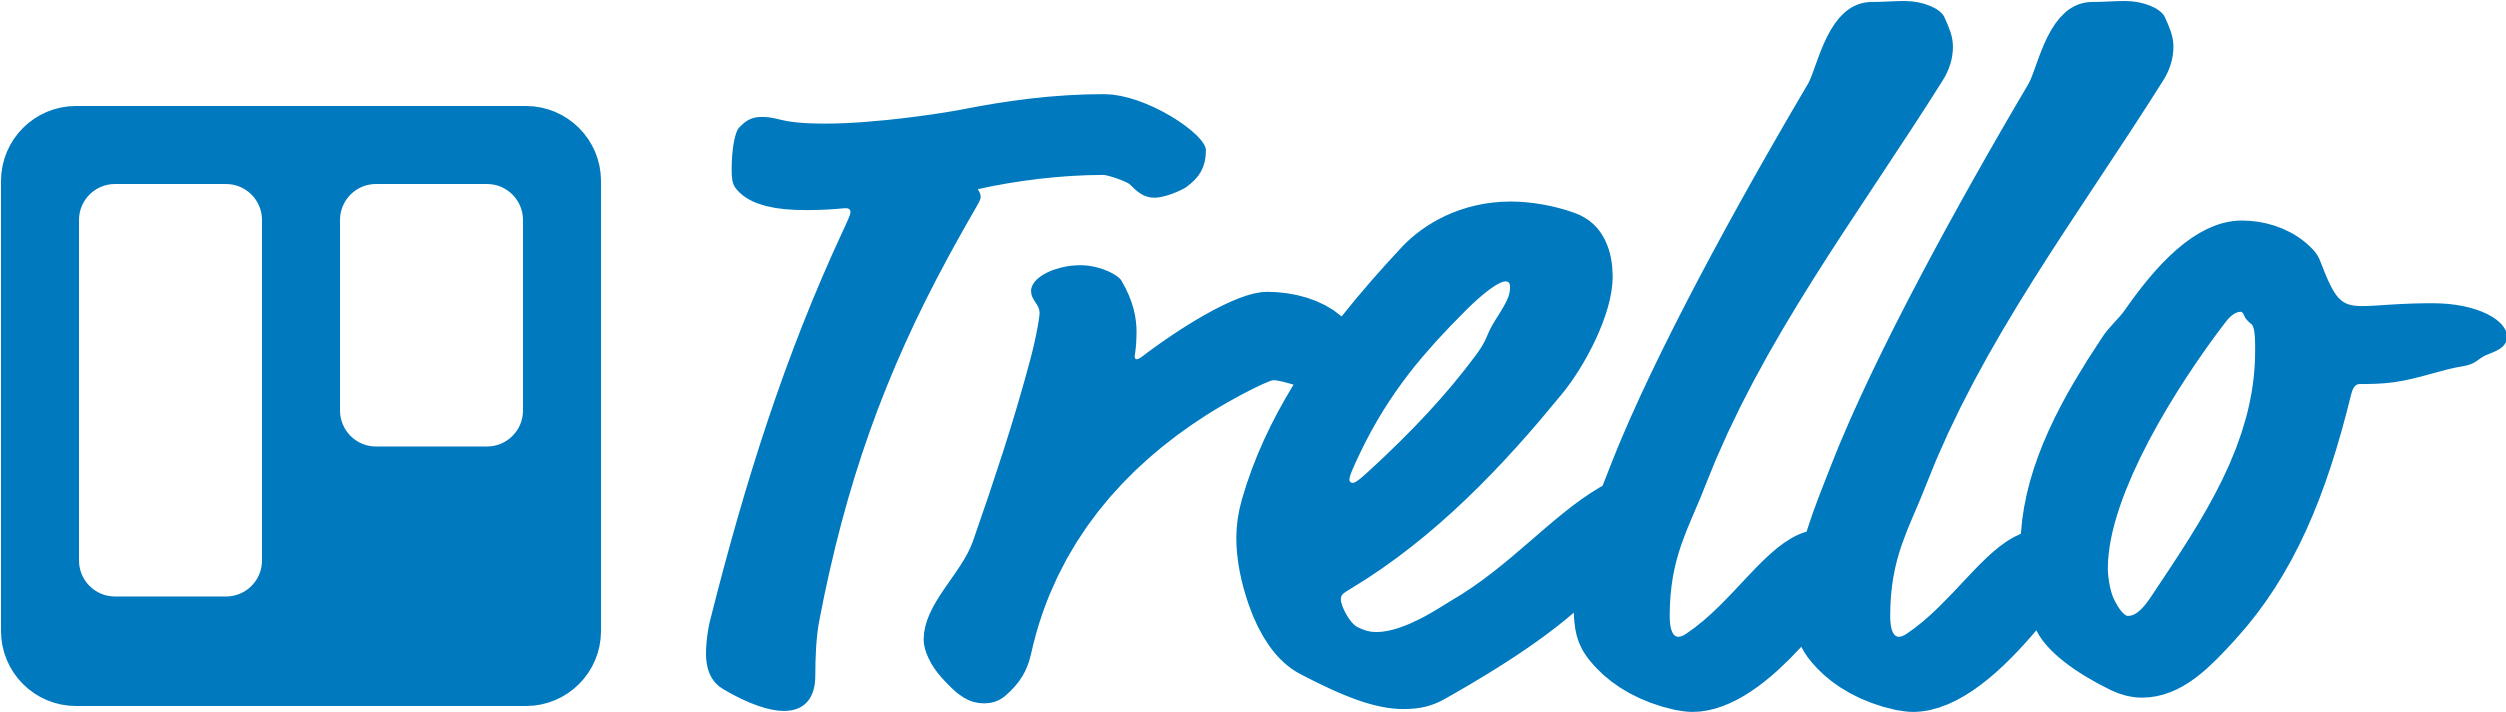 Trello Is A Task Management Website That Lets You Collaborate - Trello Logo Png (2655x816)